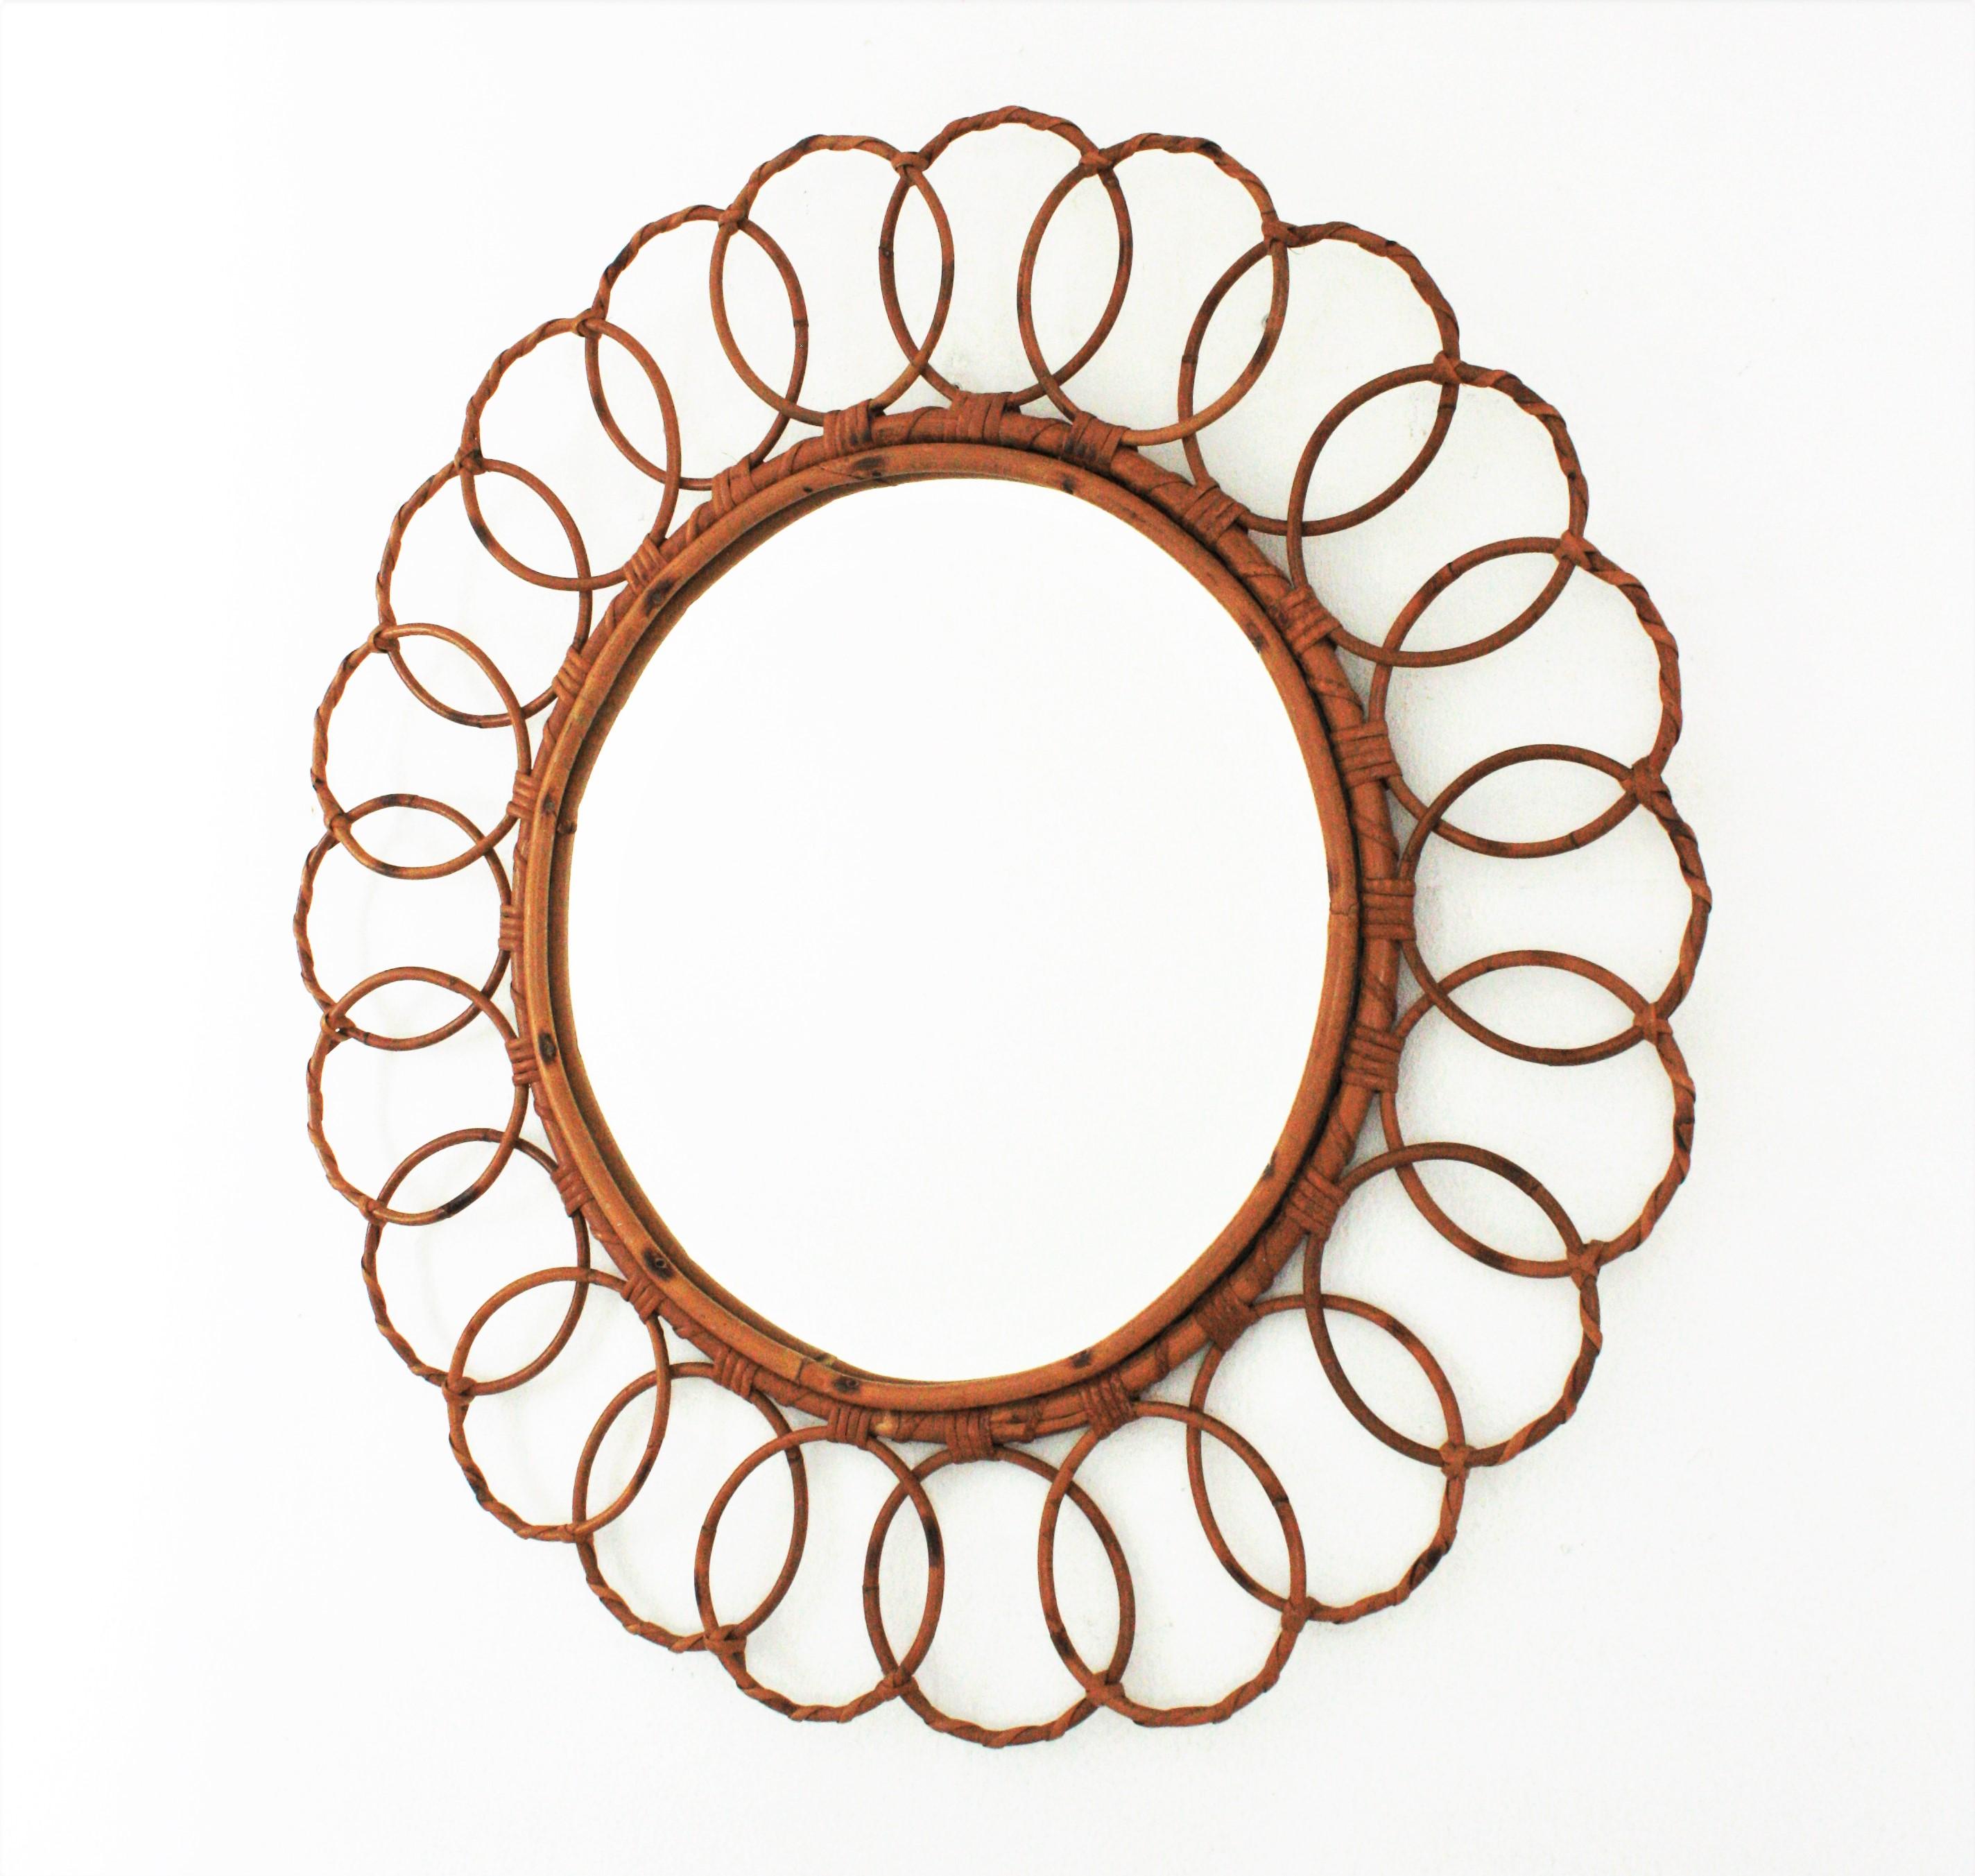 Handcrafted rattan mirror, Spain, 1960s
This round mirror has all the taste and freshness of the Mediterranean style, it combines a bohemian and midcentury taste and it would be a nice choice for a beach house or countryside house decoration but